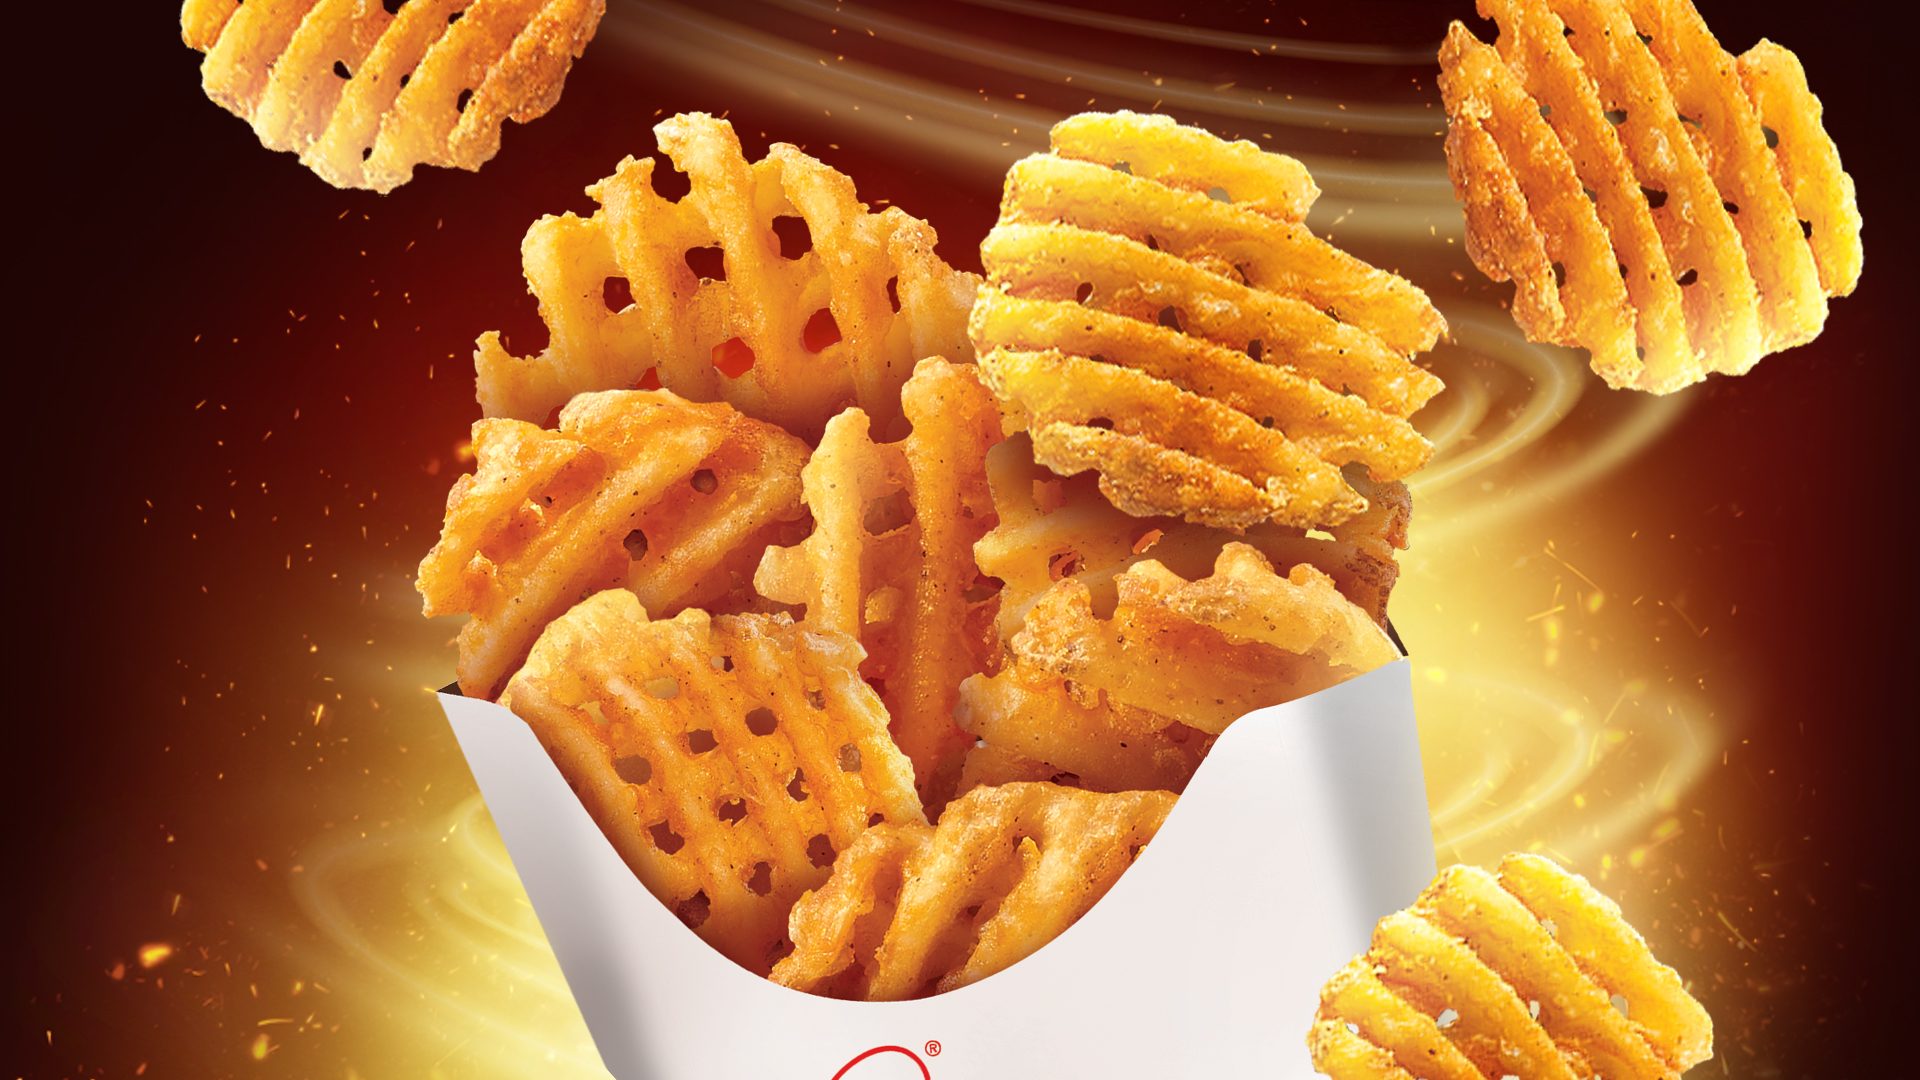 Eyes on the fries! Jollibee brings back Crisscut Fries with new dips